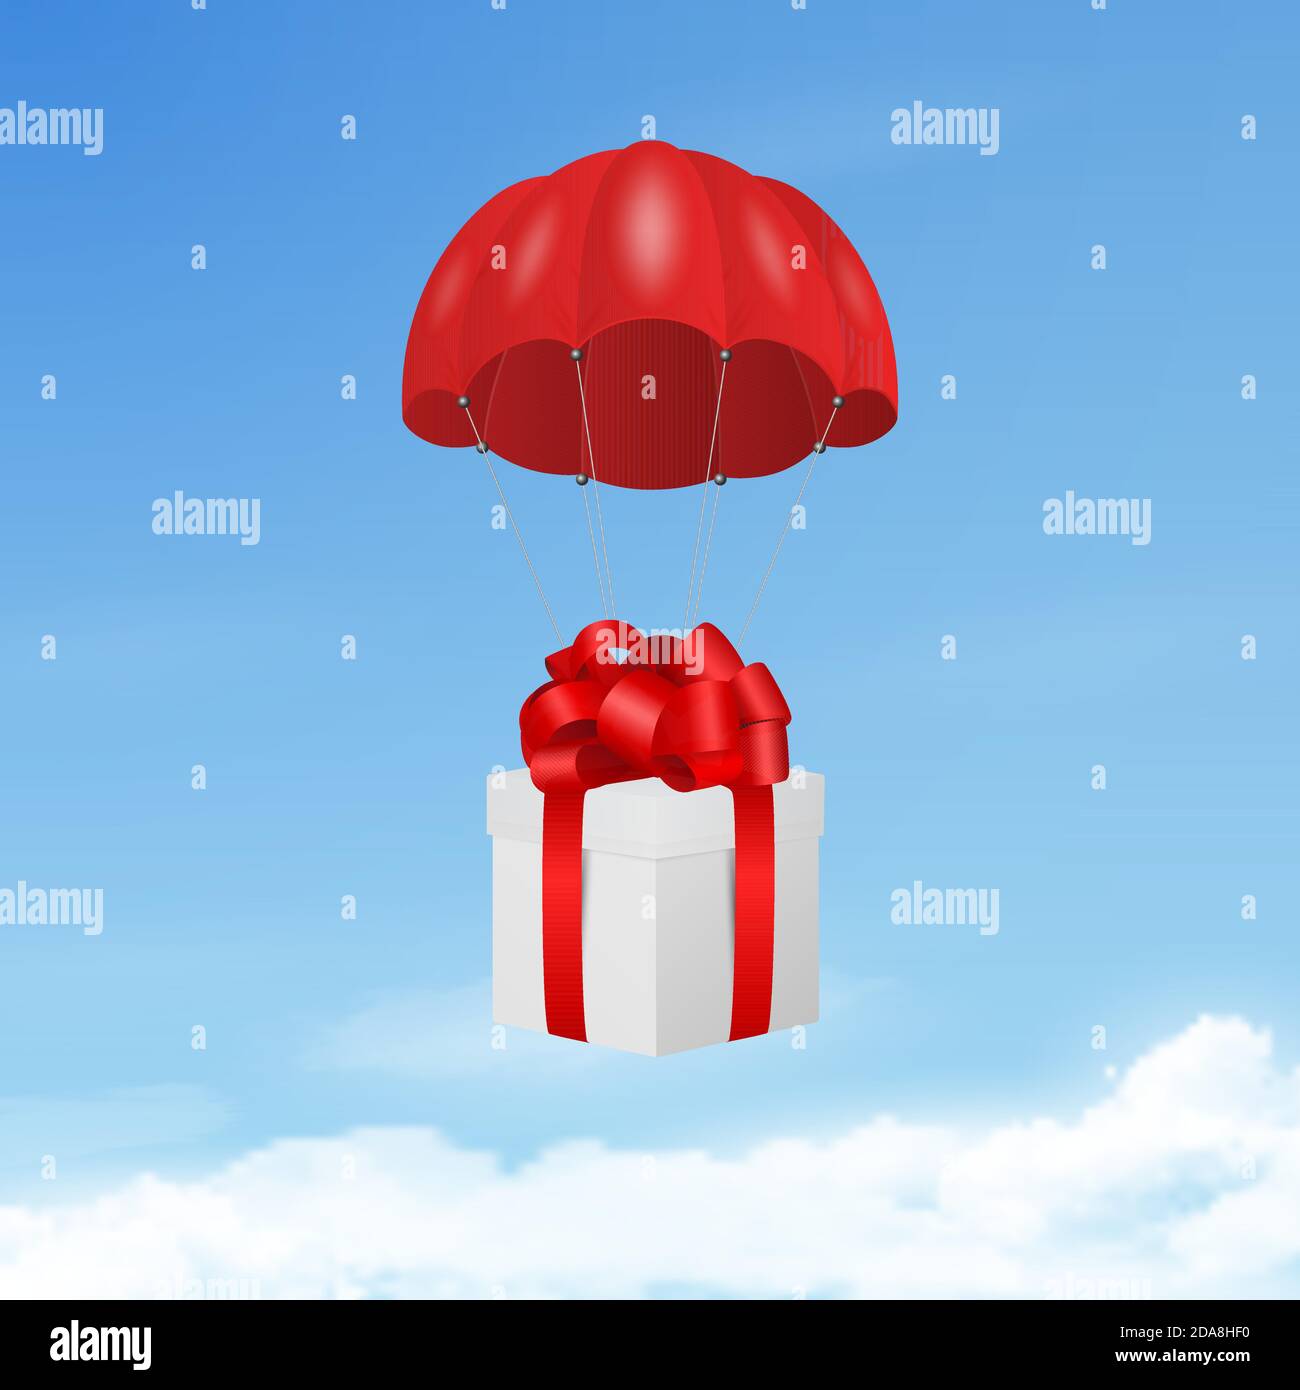 Vector 3d Realistic Red Flying Parachute with Paper Gift Boxe on Blue Sky Background. Design Template for Delivery Services, Post, E-Commerce, Web Stock Vector